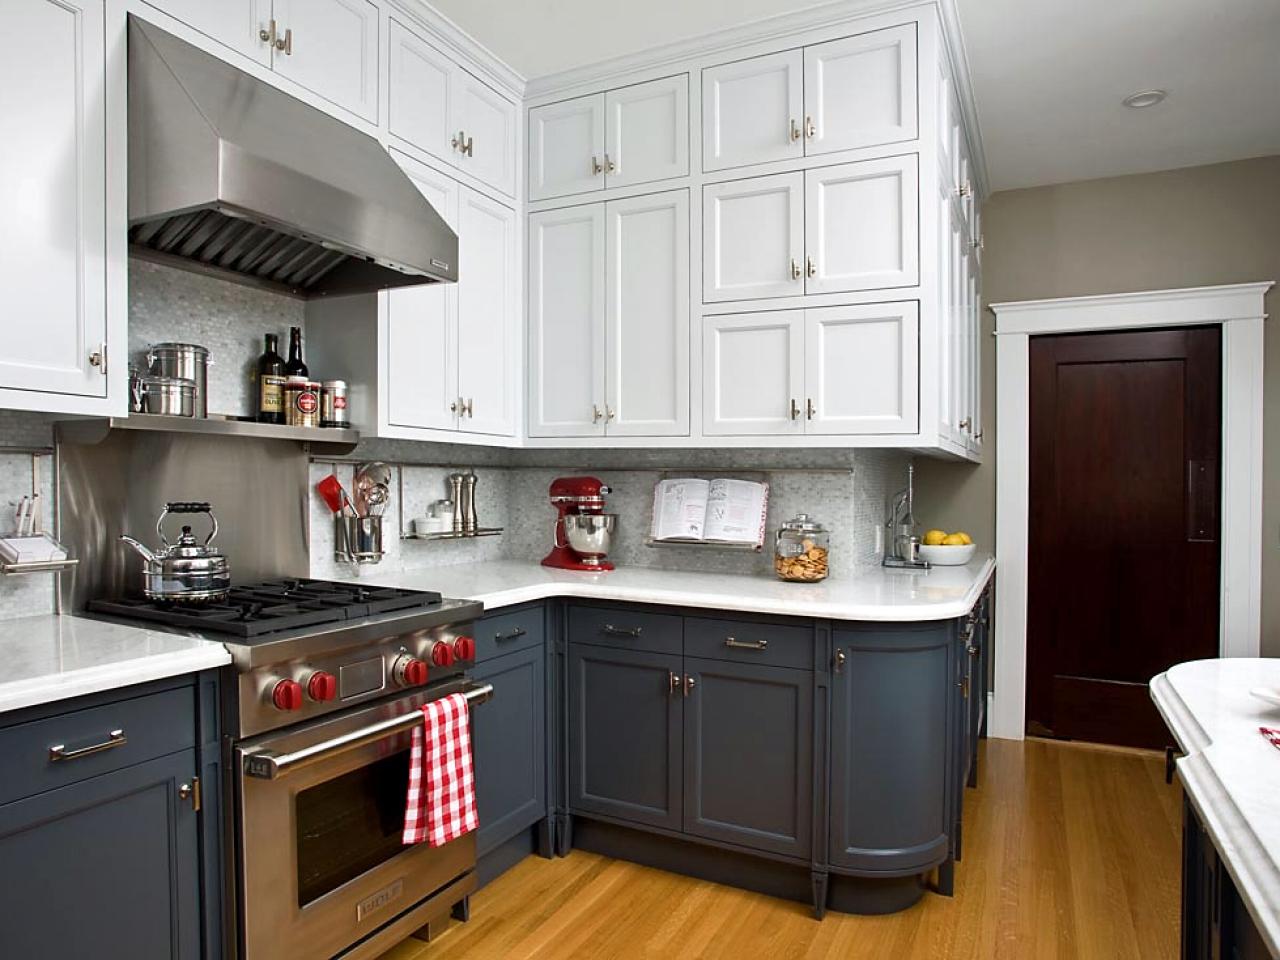 Mixing Kitchen Cabinet Styles and Finishes | Kitchen Ideas & Design